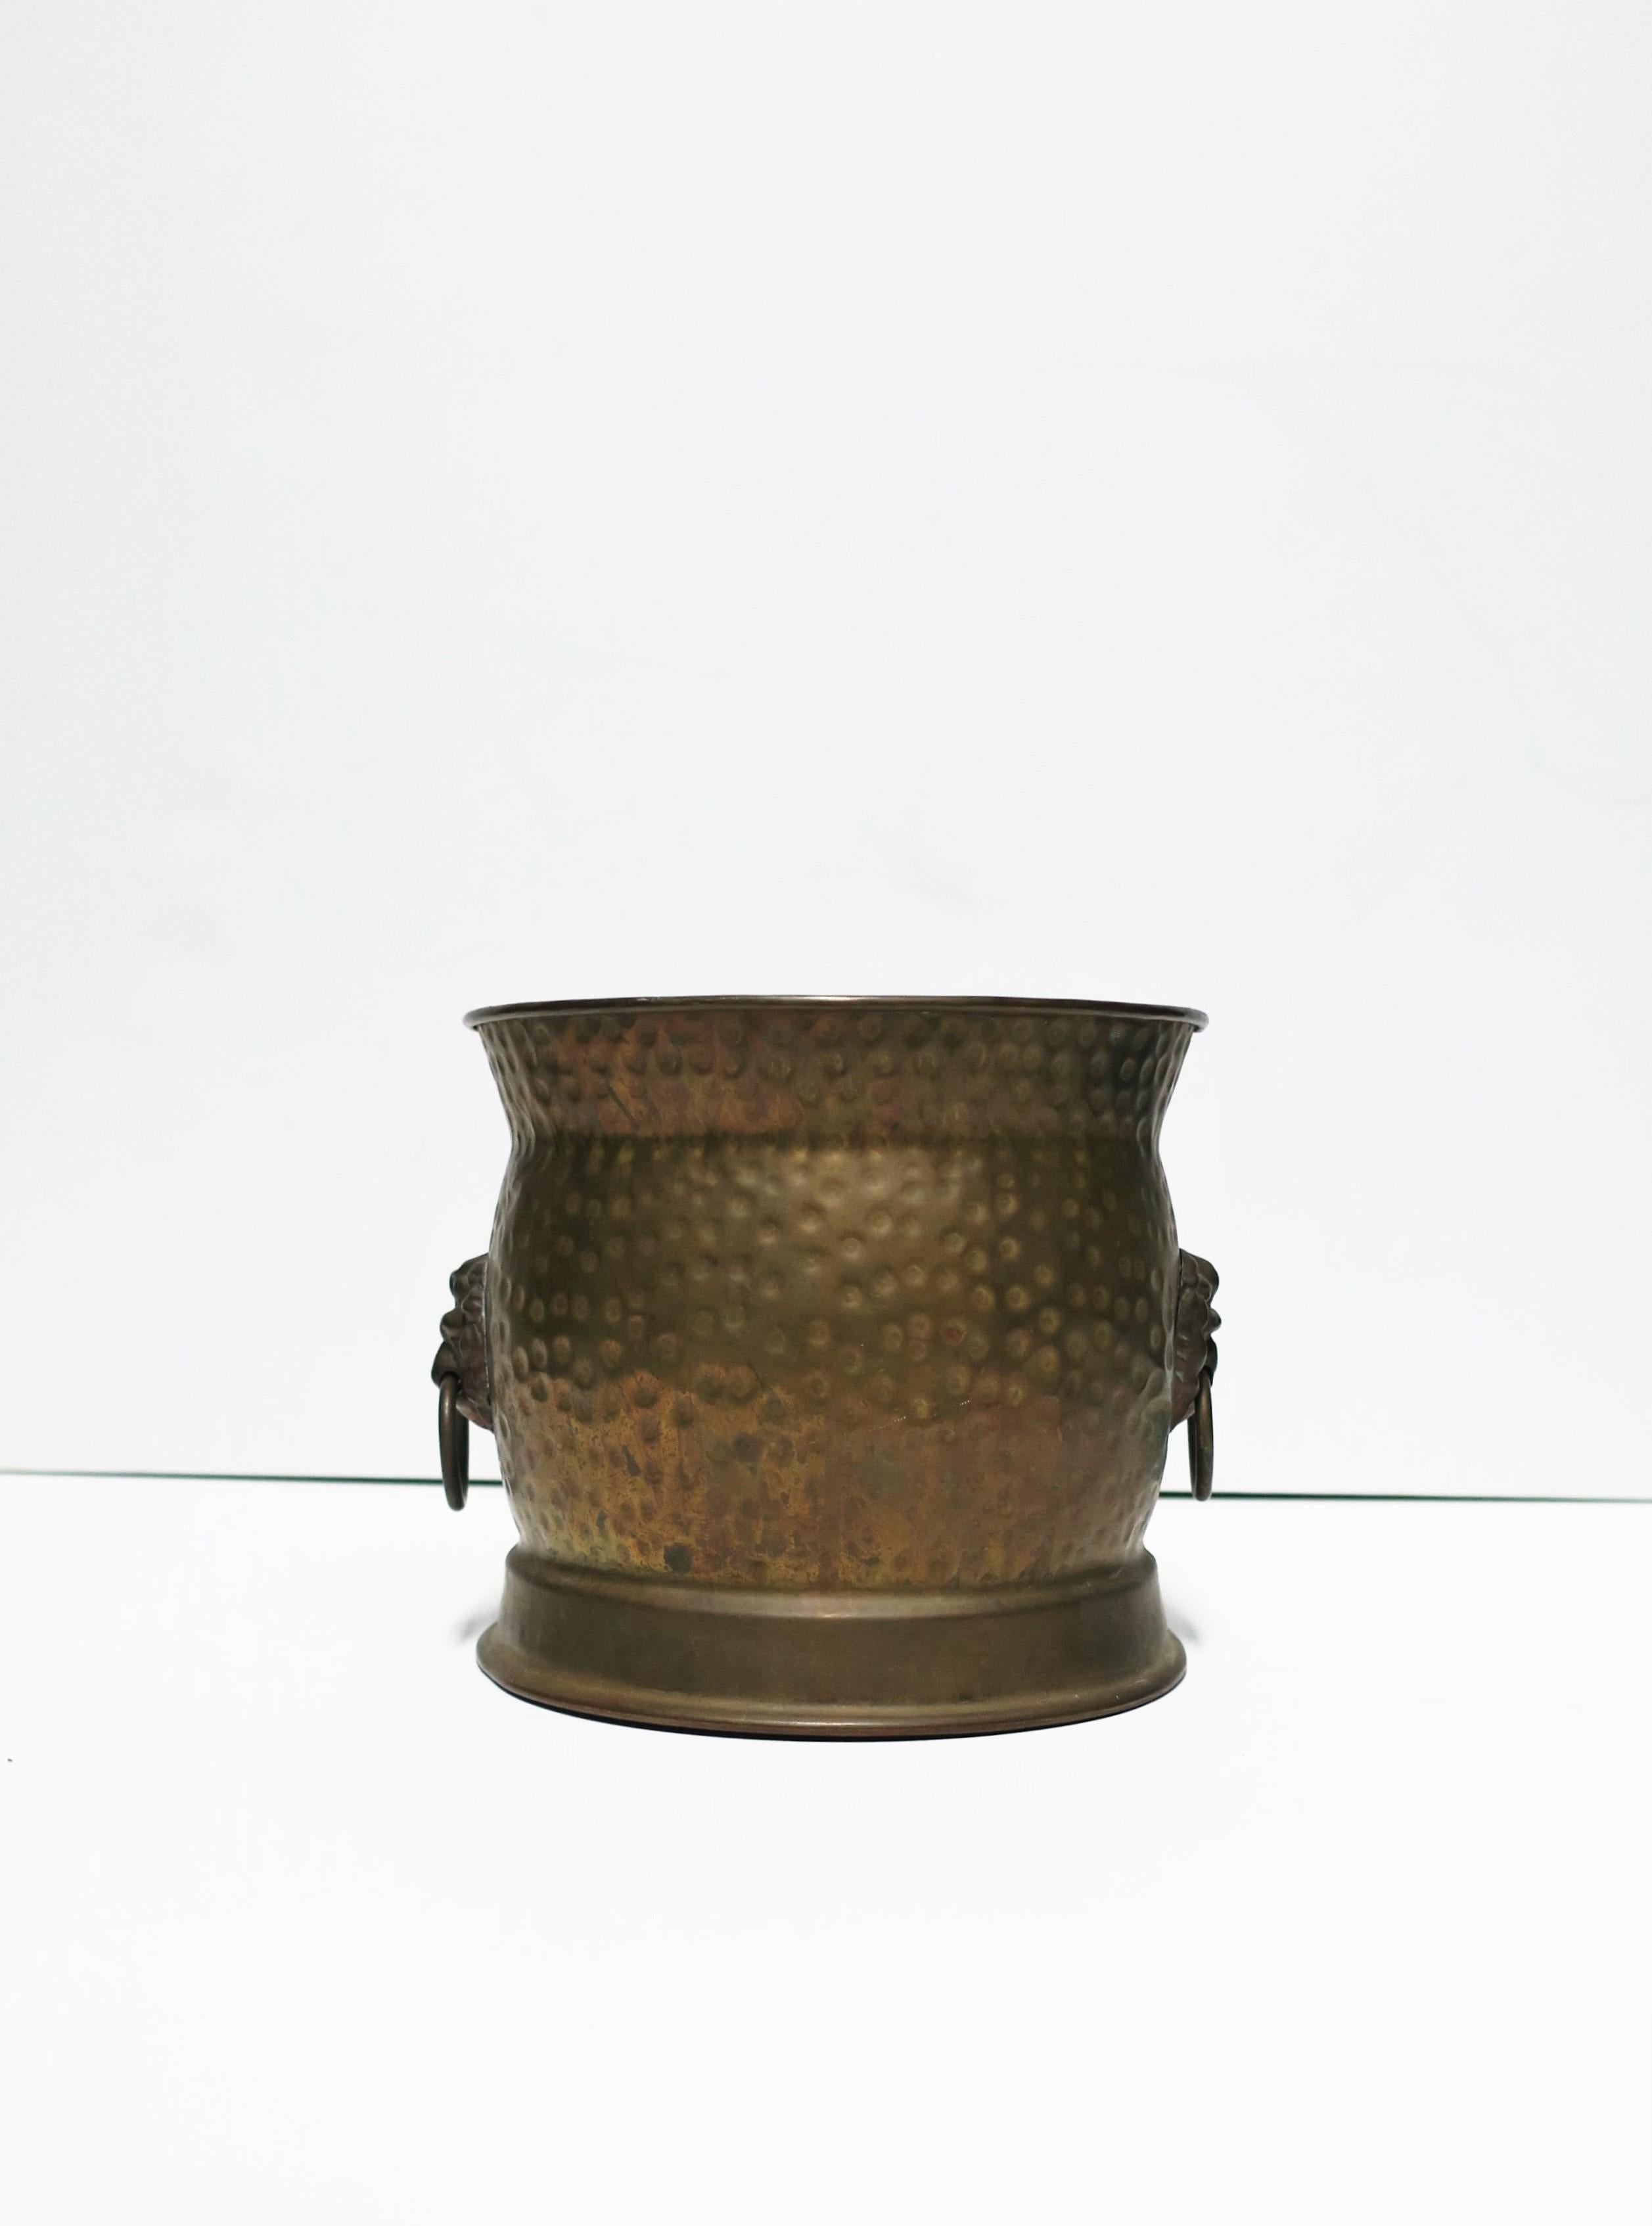 An English antique bass cachepot (plant or flower holder) with hammered design and lion head and ring detail on sides, in the Regency style, early 20th century, England. Piece is unpolished with beautiful age patina to brass. Dimensions: 7”D x 7.38”